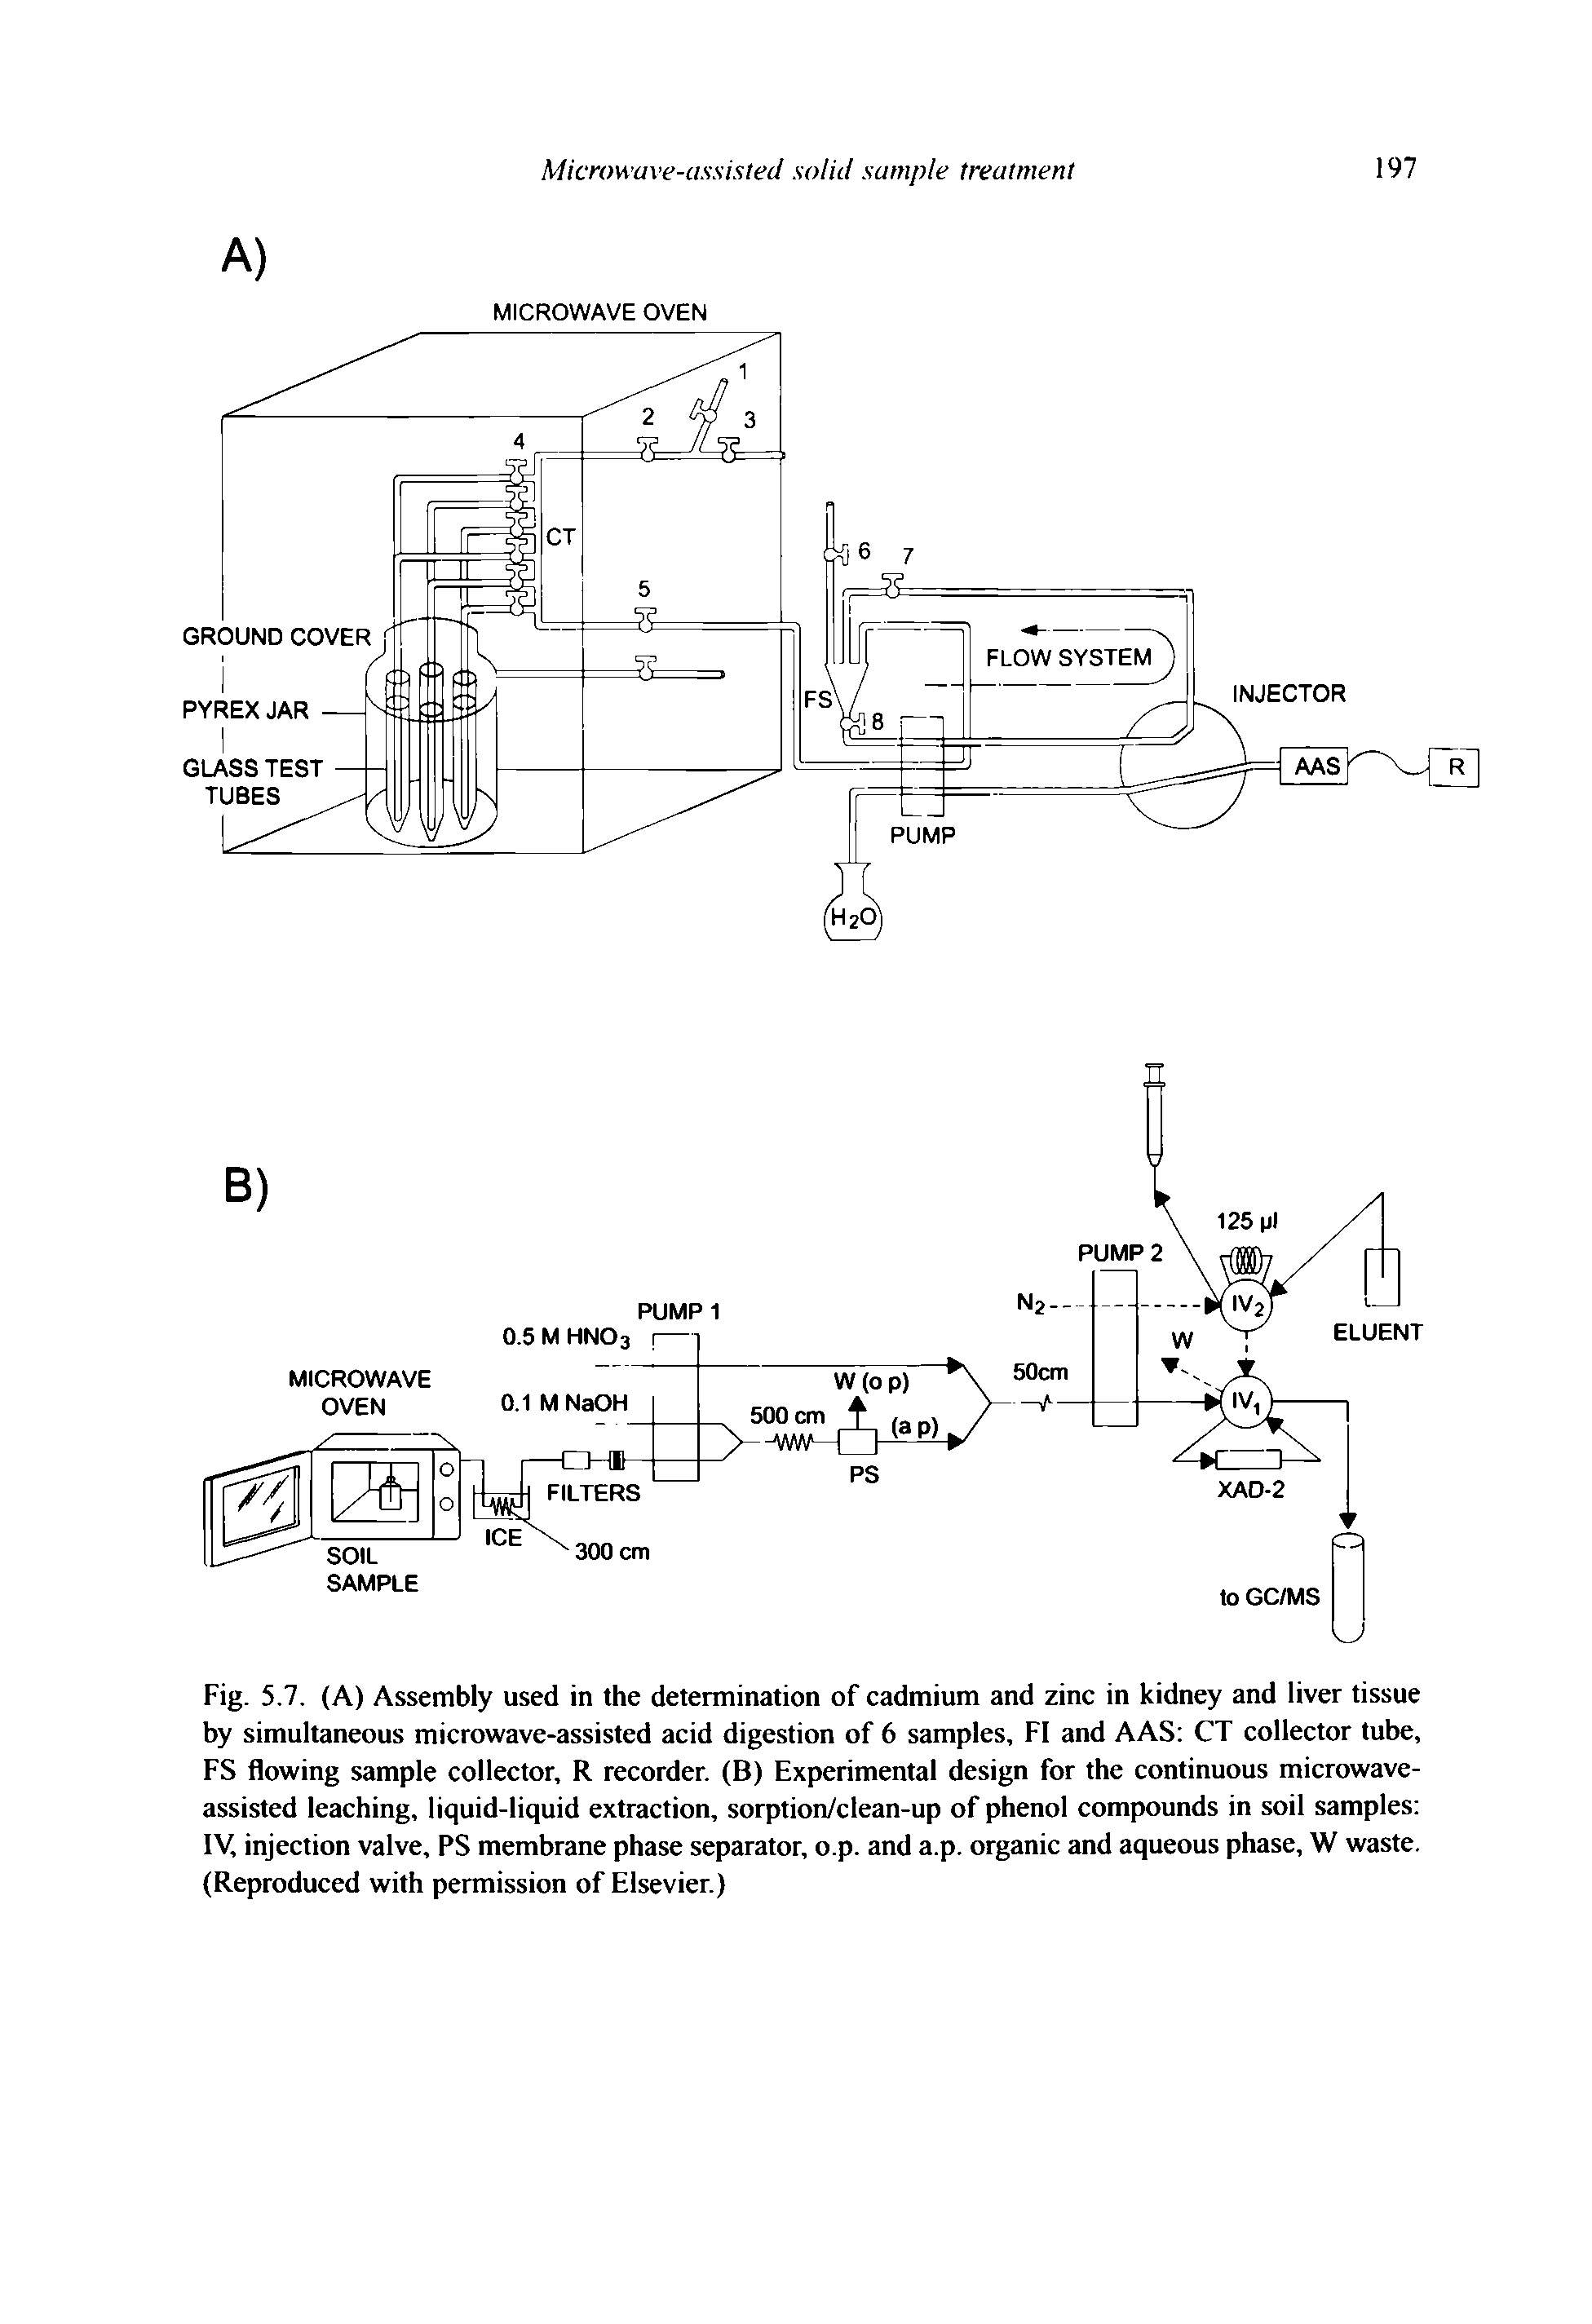 Fig. 5.7. (A) Assembly used in the determination of cadmium and zinc in kidney and liver tissue by simultaneous microwave-assisted acid digestion of 6 samples, FI and AAS CT collector tube, FS flowing sample collector, R recorder. (B) Experimental design for the continuous microwave-assisted leaching, liquid-liquid extraction, sorption/clean-up of phenol compounds in soil samples IV, injection valve, PS membrane phase separator, o.p. and a.p. organic and aqueous phase, W waste. (Reproduced with permission of Elsevier.)...